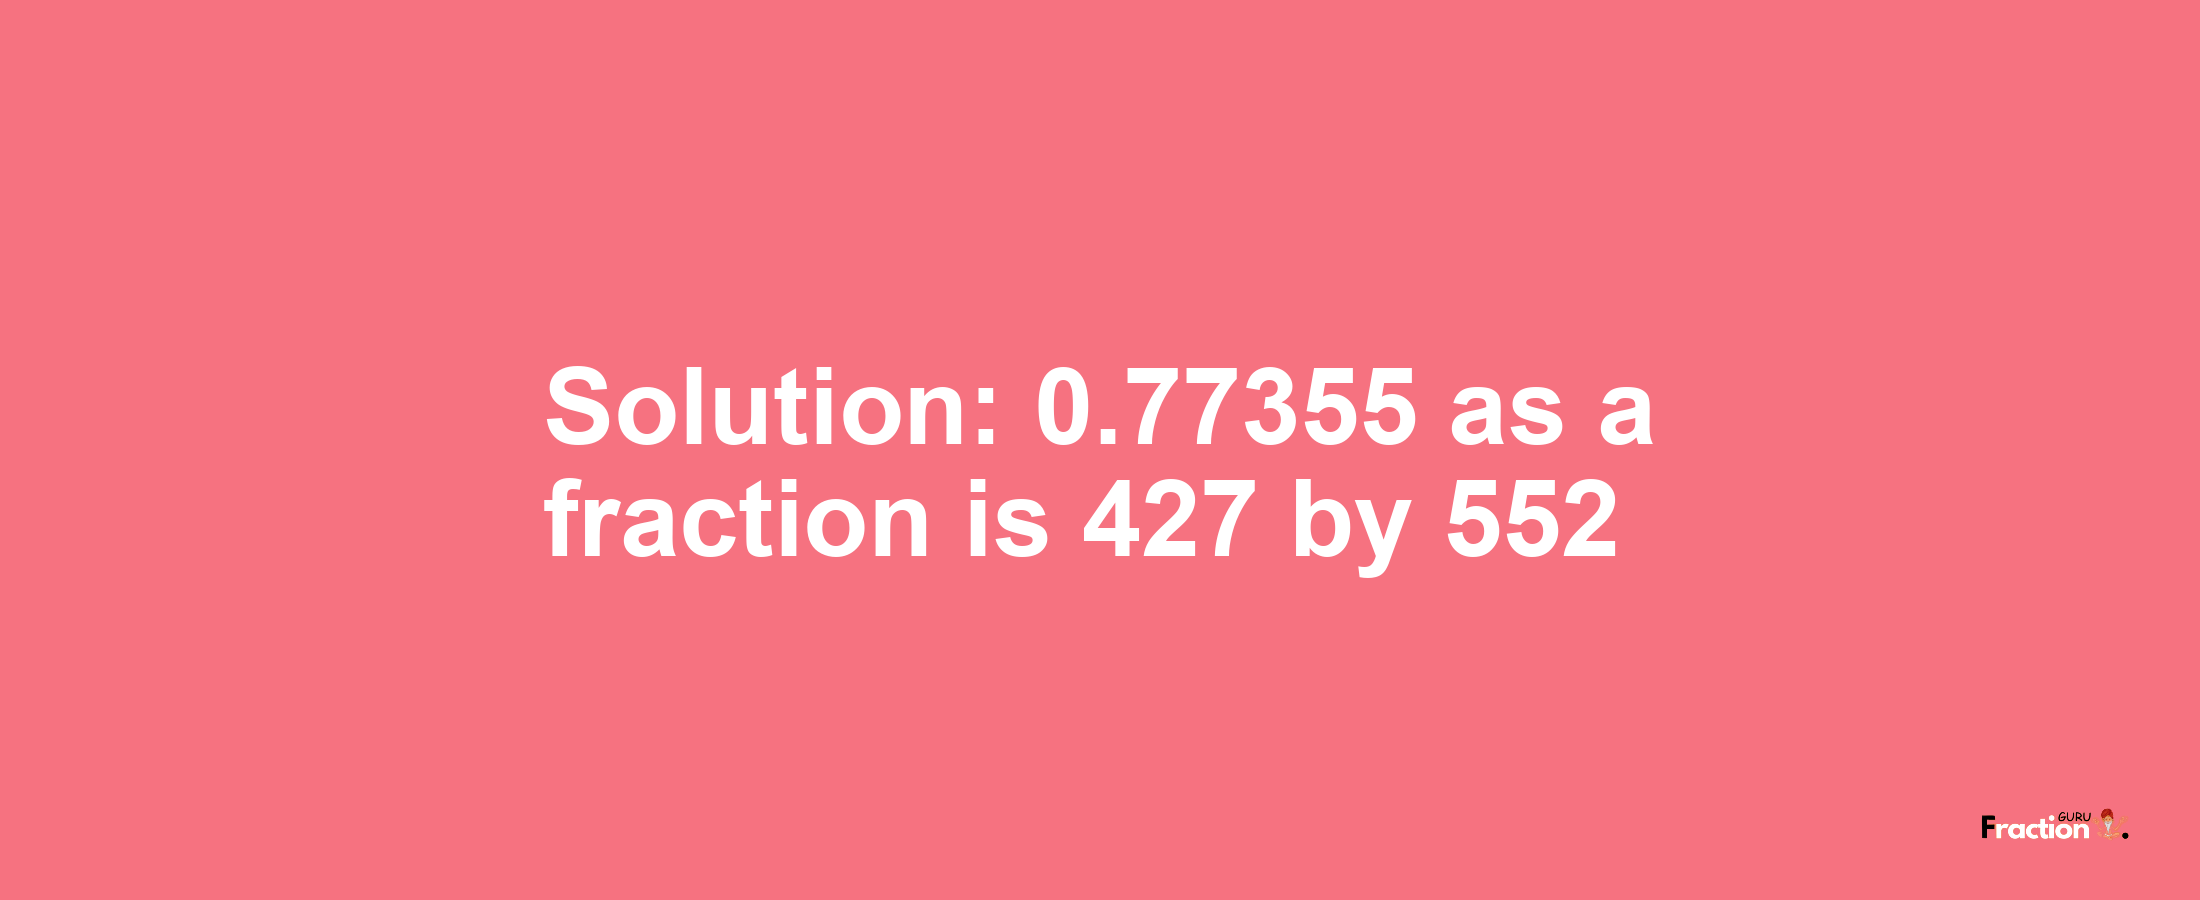 Solution:0.77355 as a fraction is 427/552